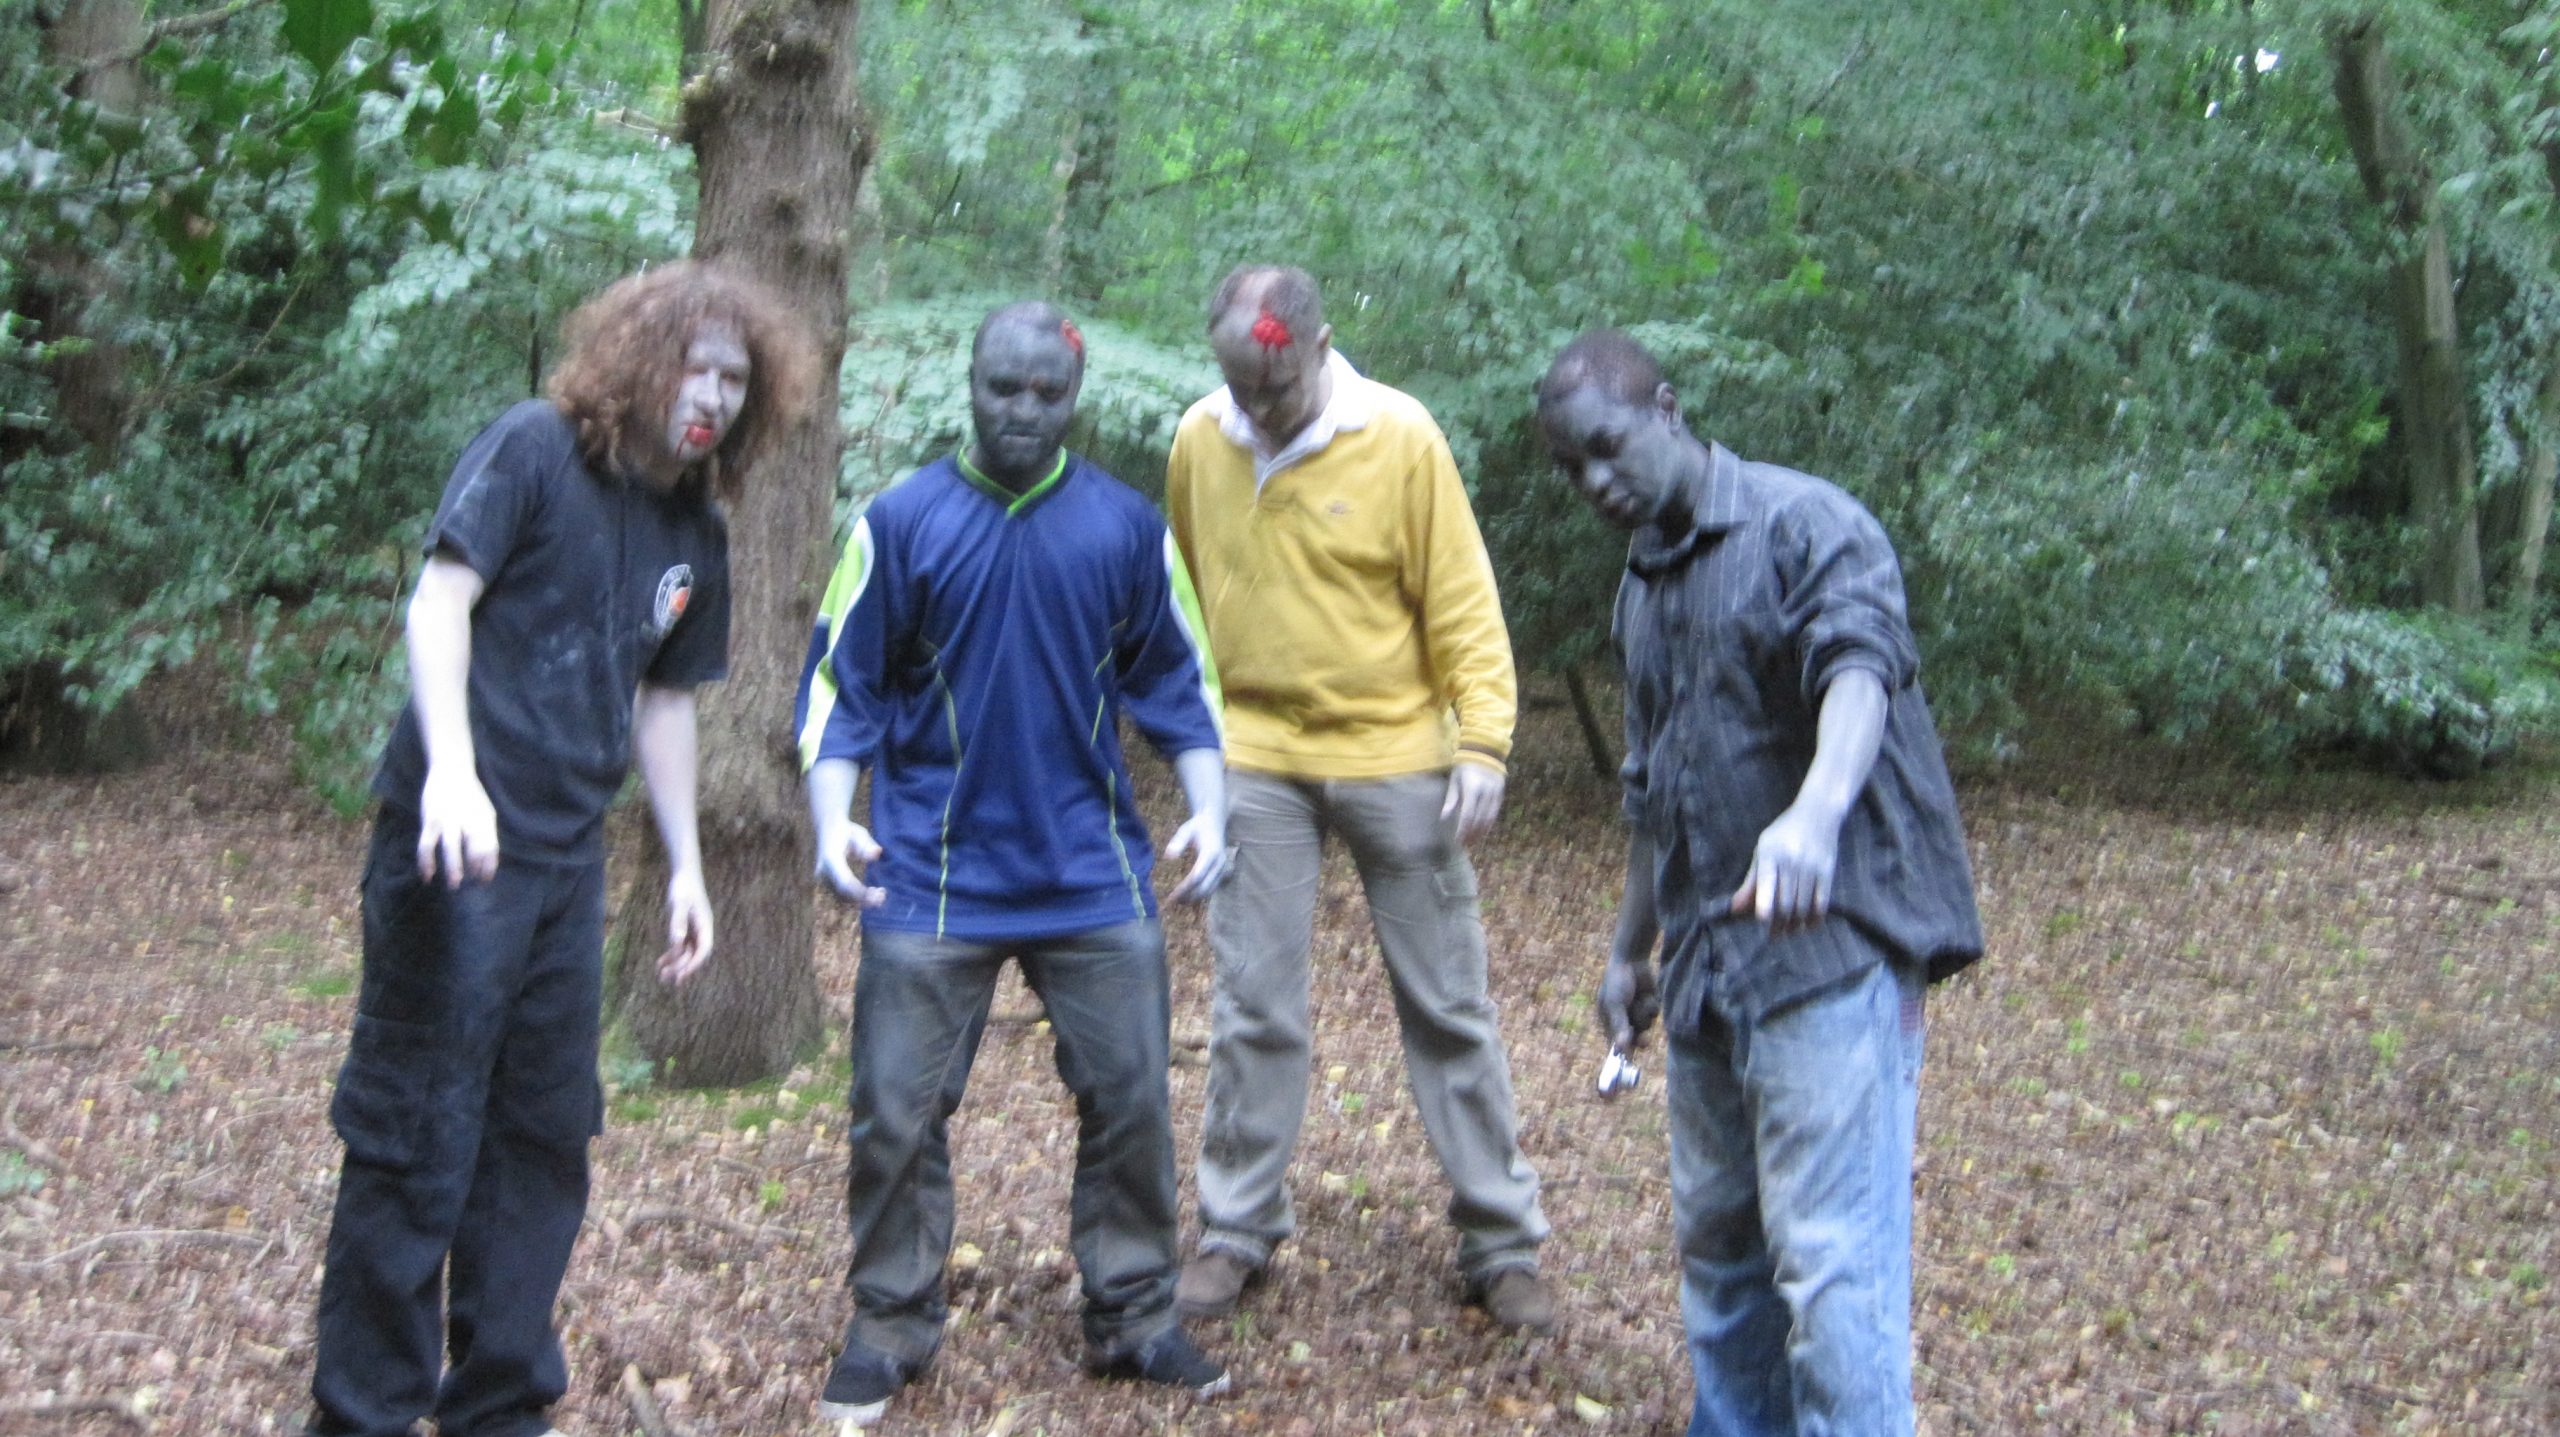 Zombies in Epping forest